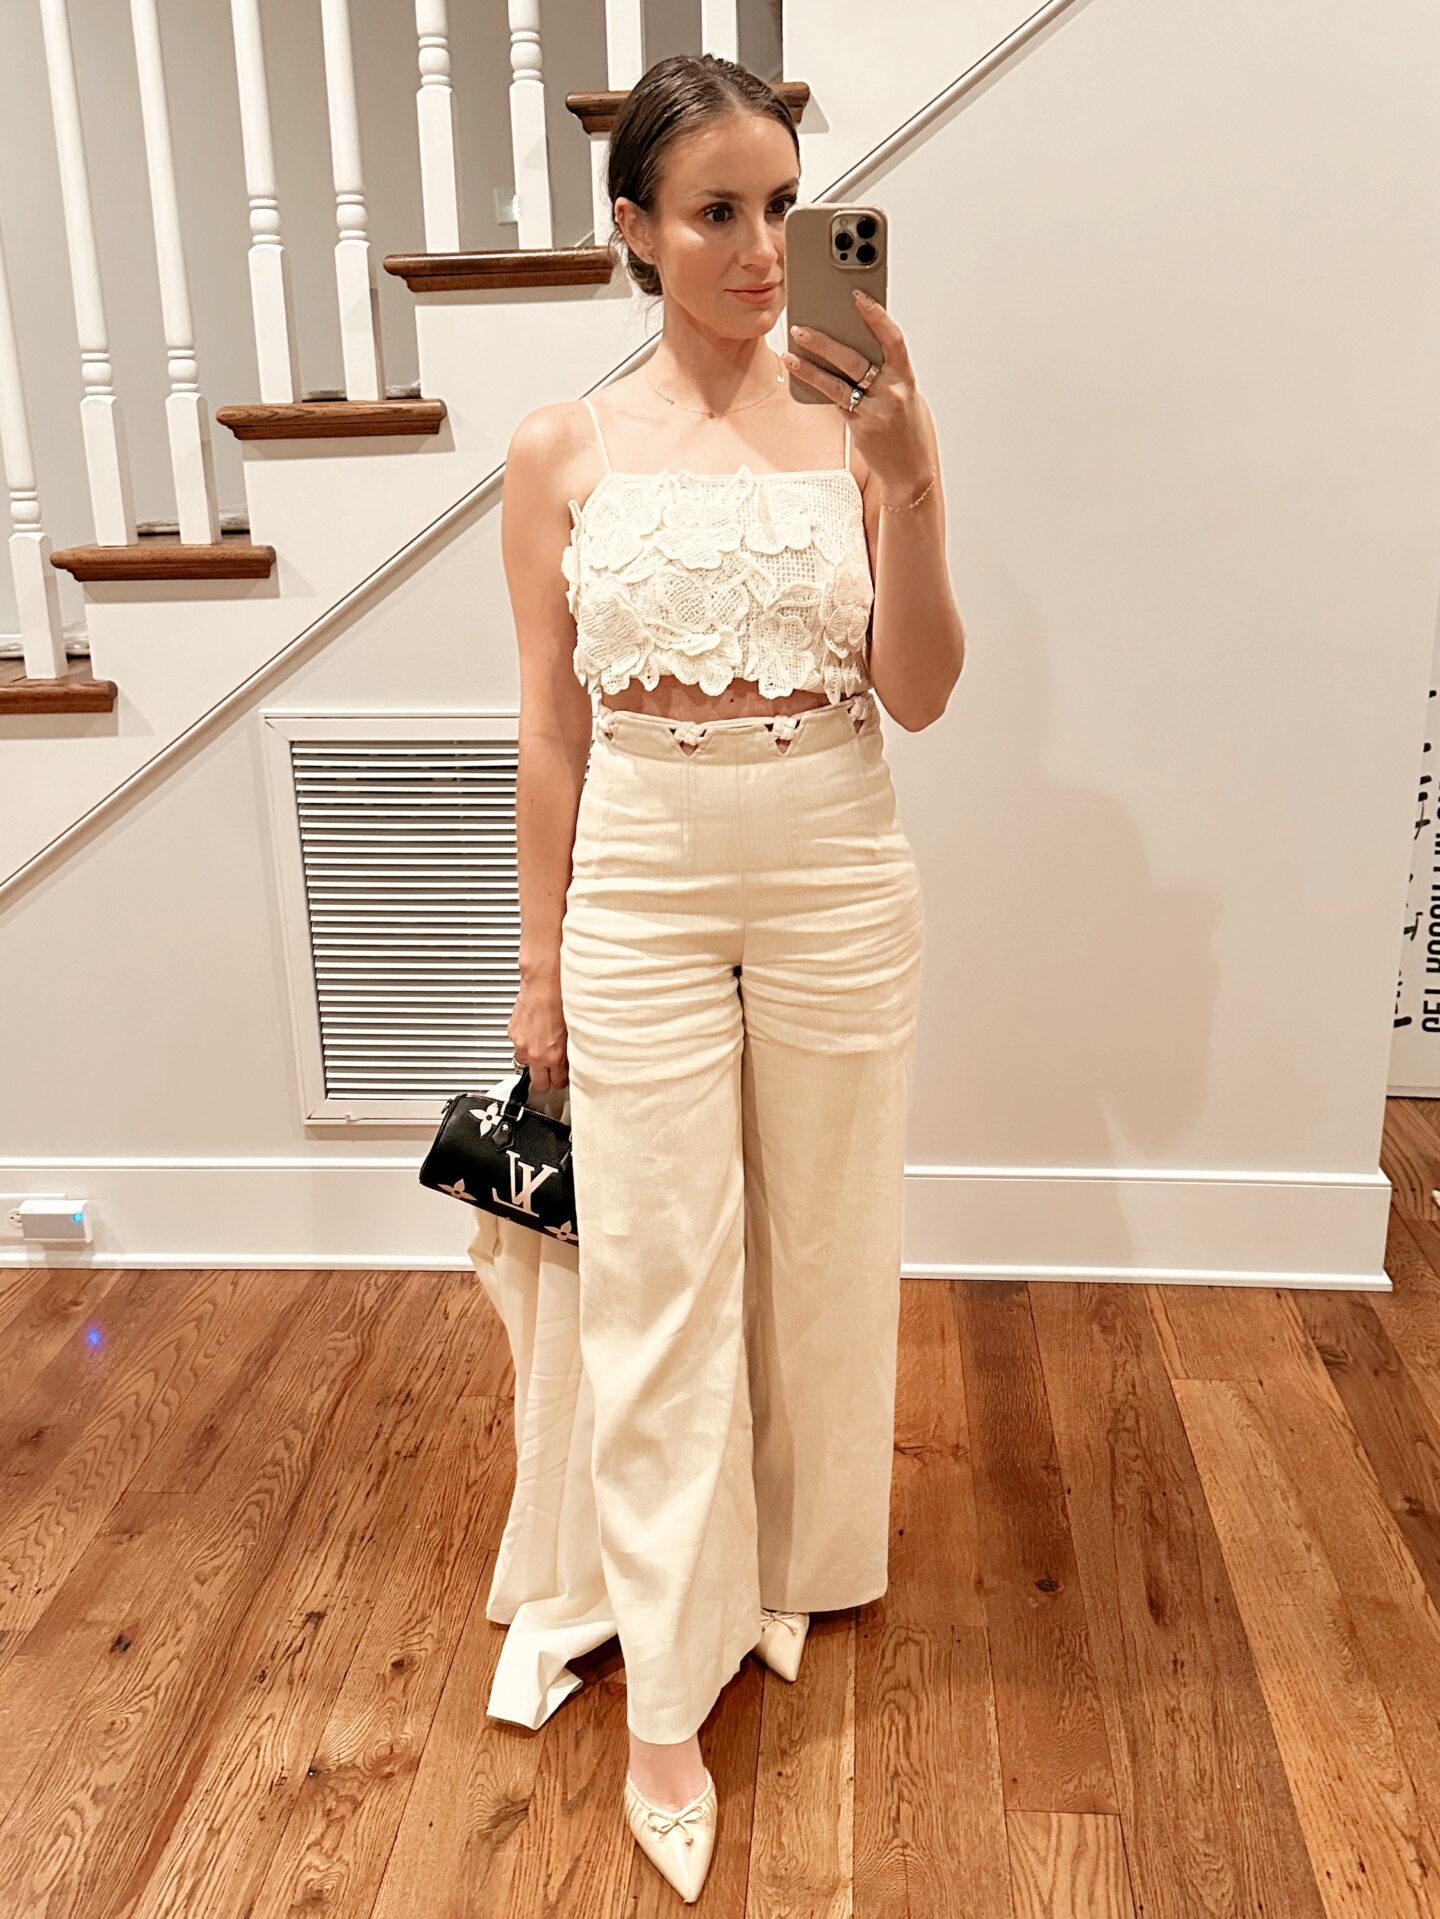 My Favorite Pieces From Dillard's Exclusive Brand: Antonio Melani X M.G. Style. Fashion blogger Angela Lanter wearing the x M.G. Style Nautical Rope Belt Detail Linen Blend Pants and x M.G. Style Havana Crochet Lace Floral Crop Top.